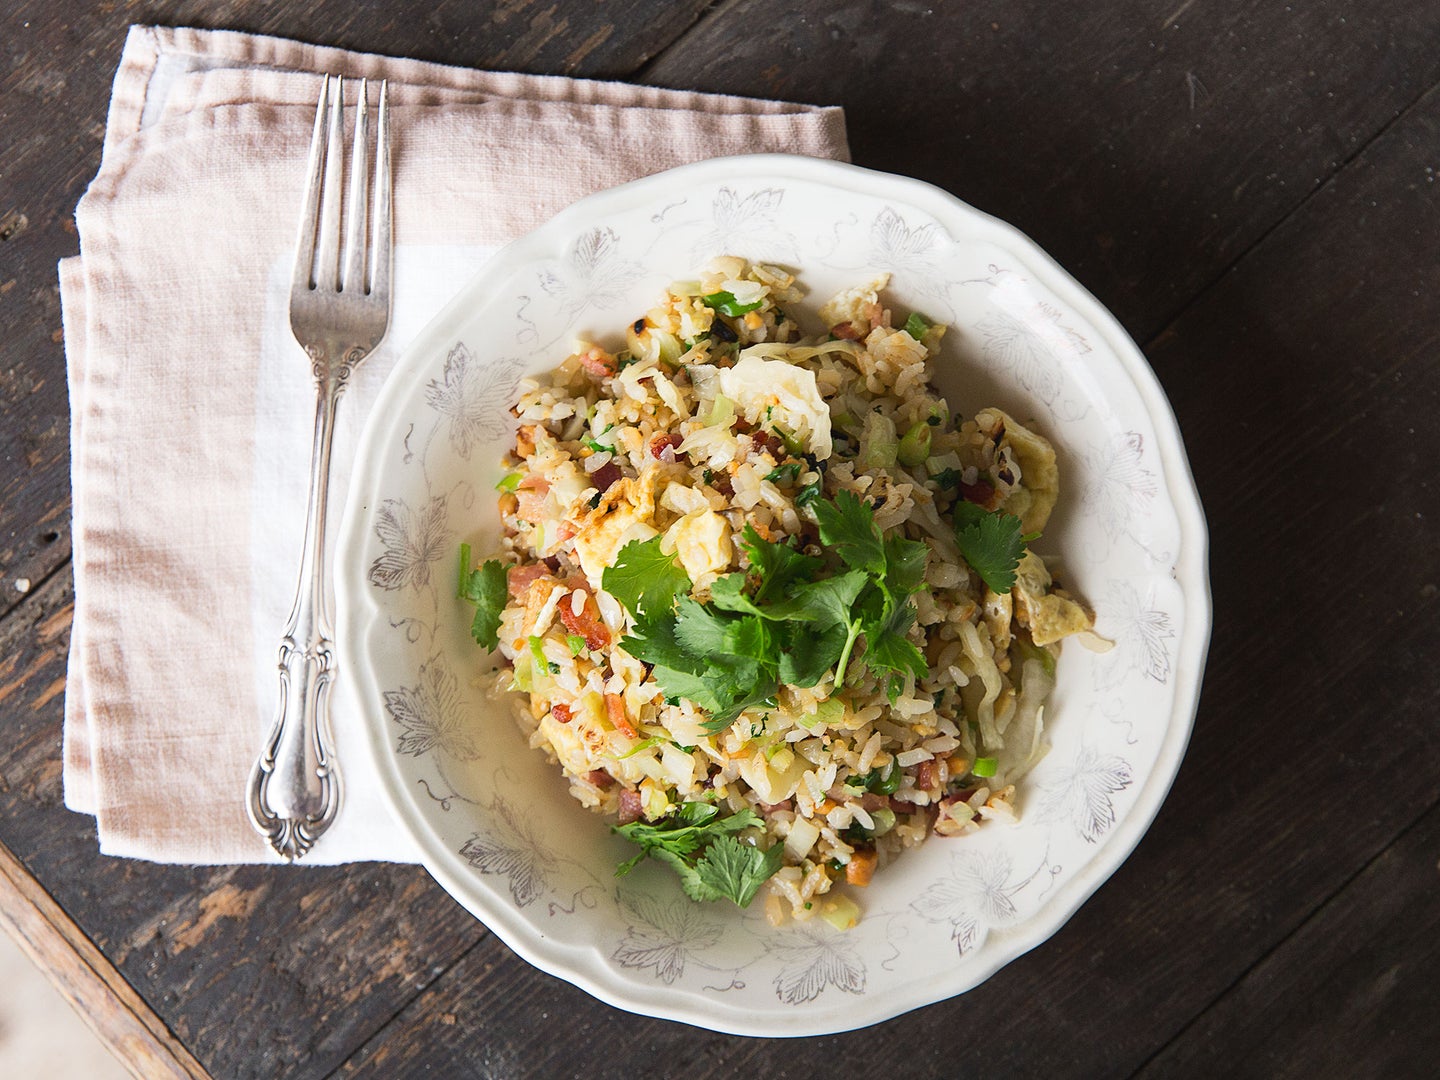 This simple fried rice is as good for breakfast as it is for dinner. Thick-cut bacon will make for more meaty, chewy bits. Cookbook writer Amy Thielen often adds a little sauerkraut for a further Midwestern touch. <a href="https://www.saveur.com/bacon-and-egg-fried-rice-recipe">Get the recipe for bacon and egg fried rice »</a>